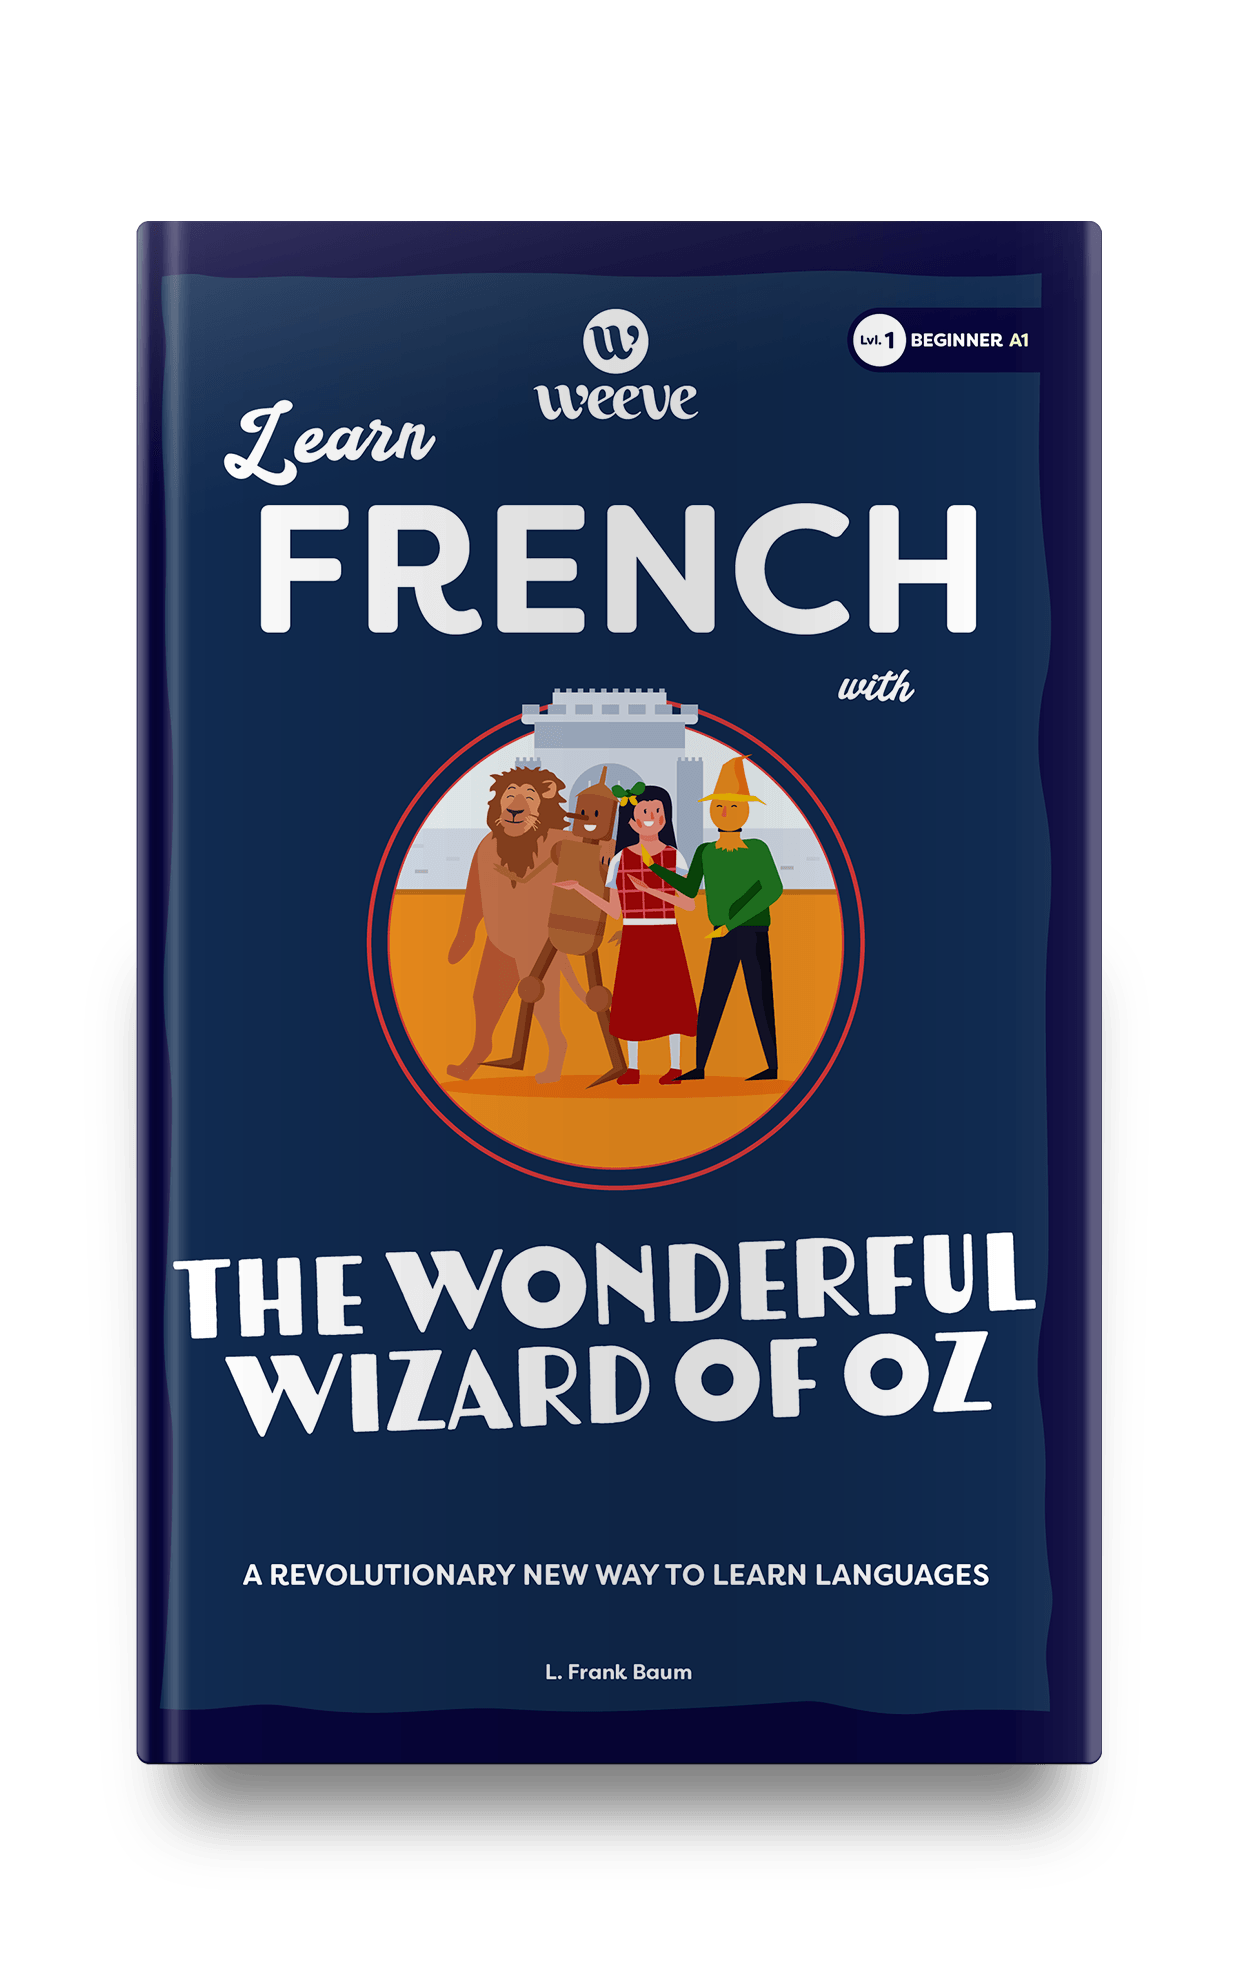 Learn French with The Wonderful Wizard Of Oz - Weeve